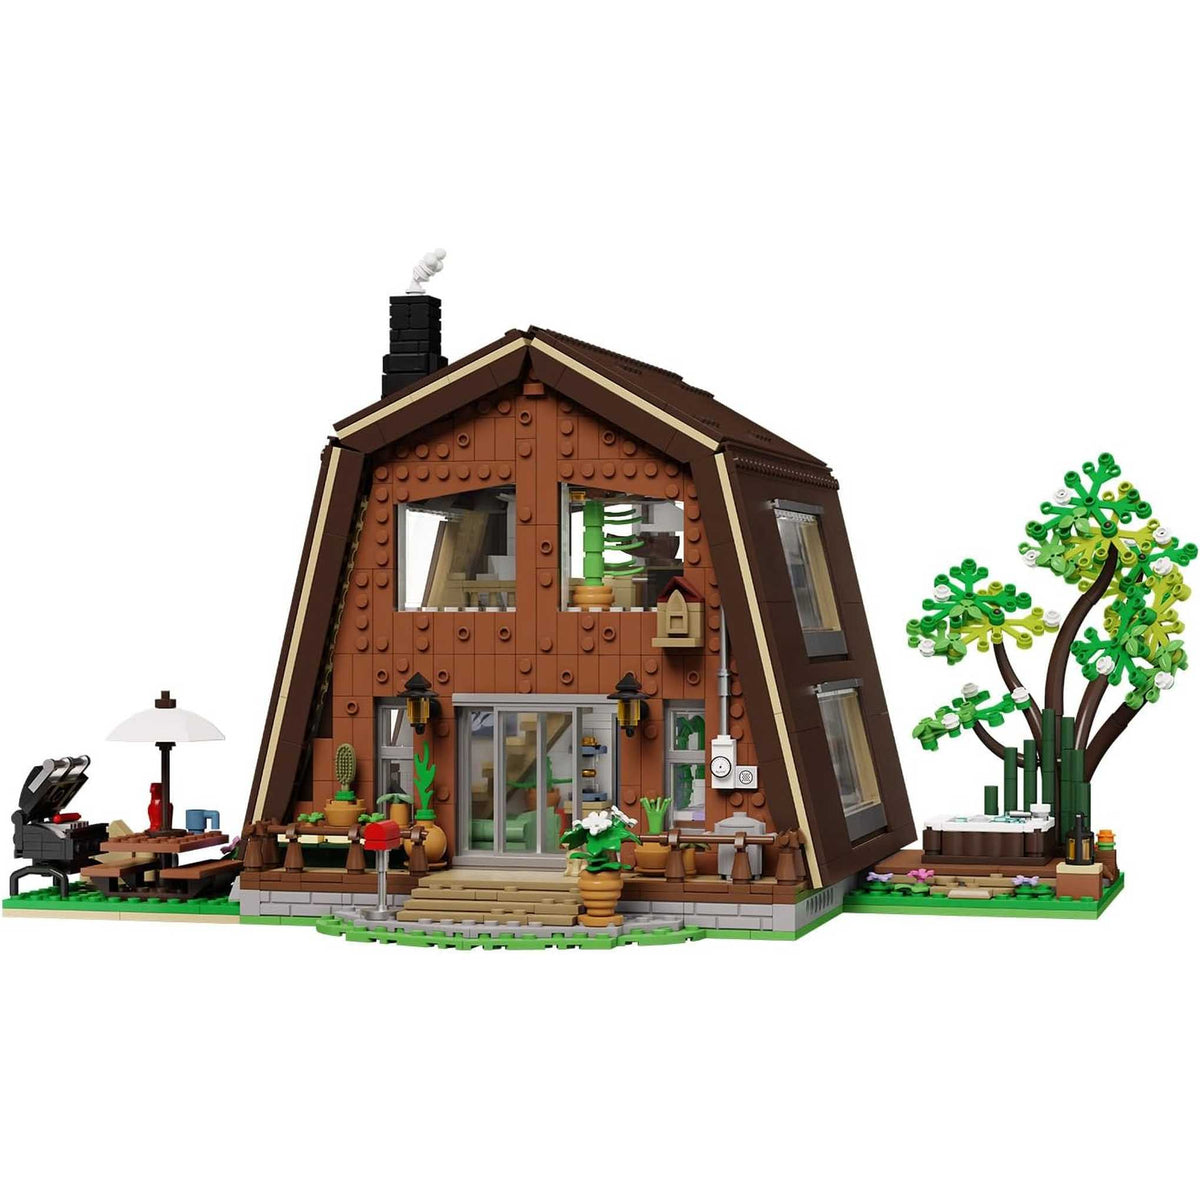 85003 - Forest Cabin (Pantasy)